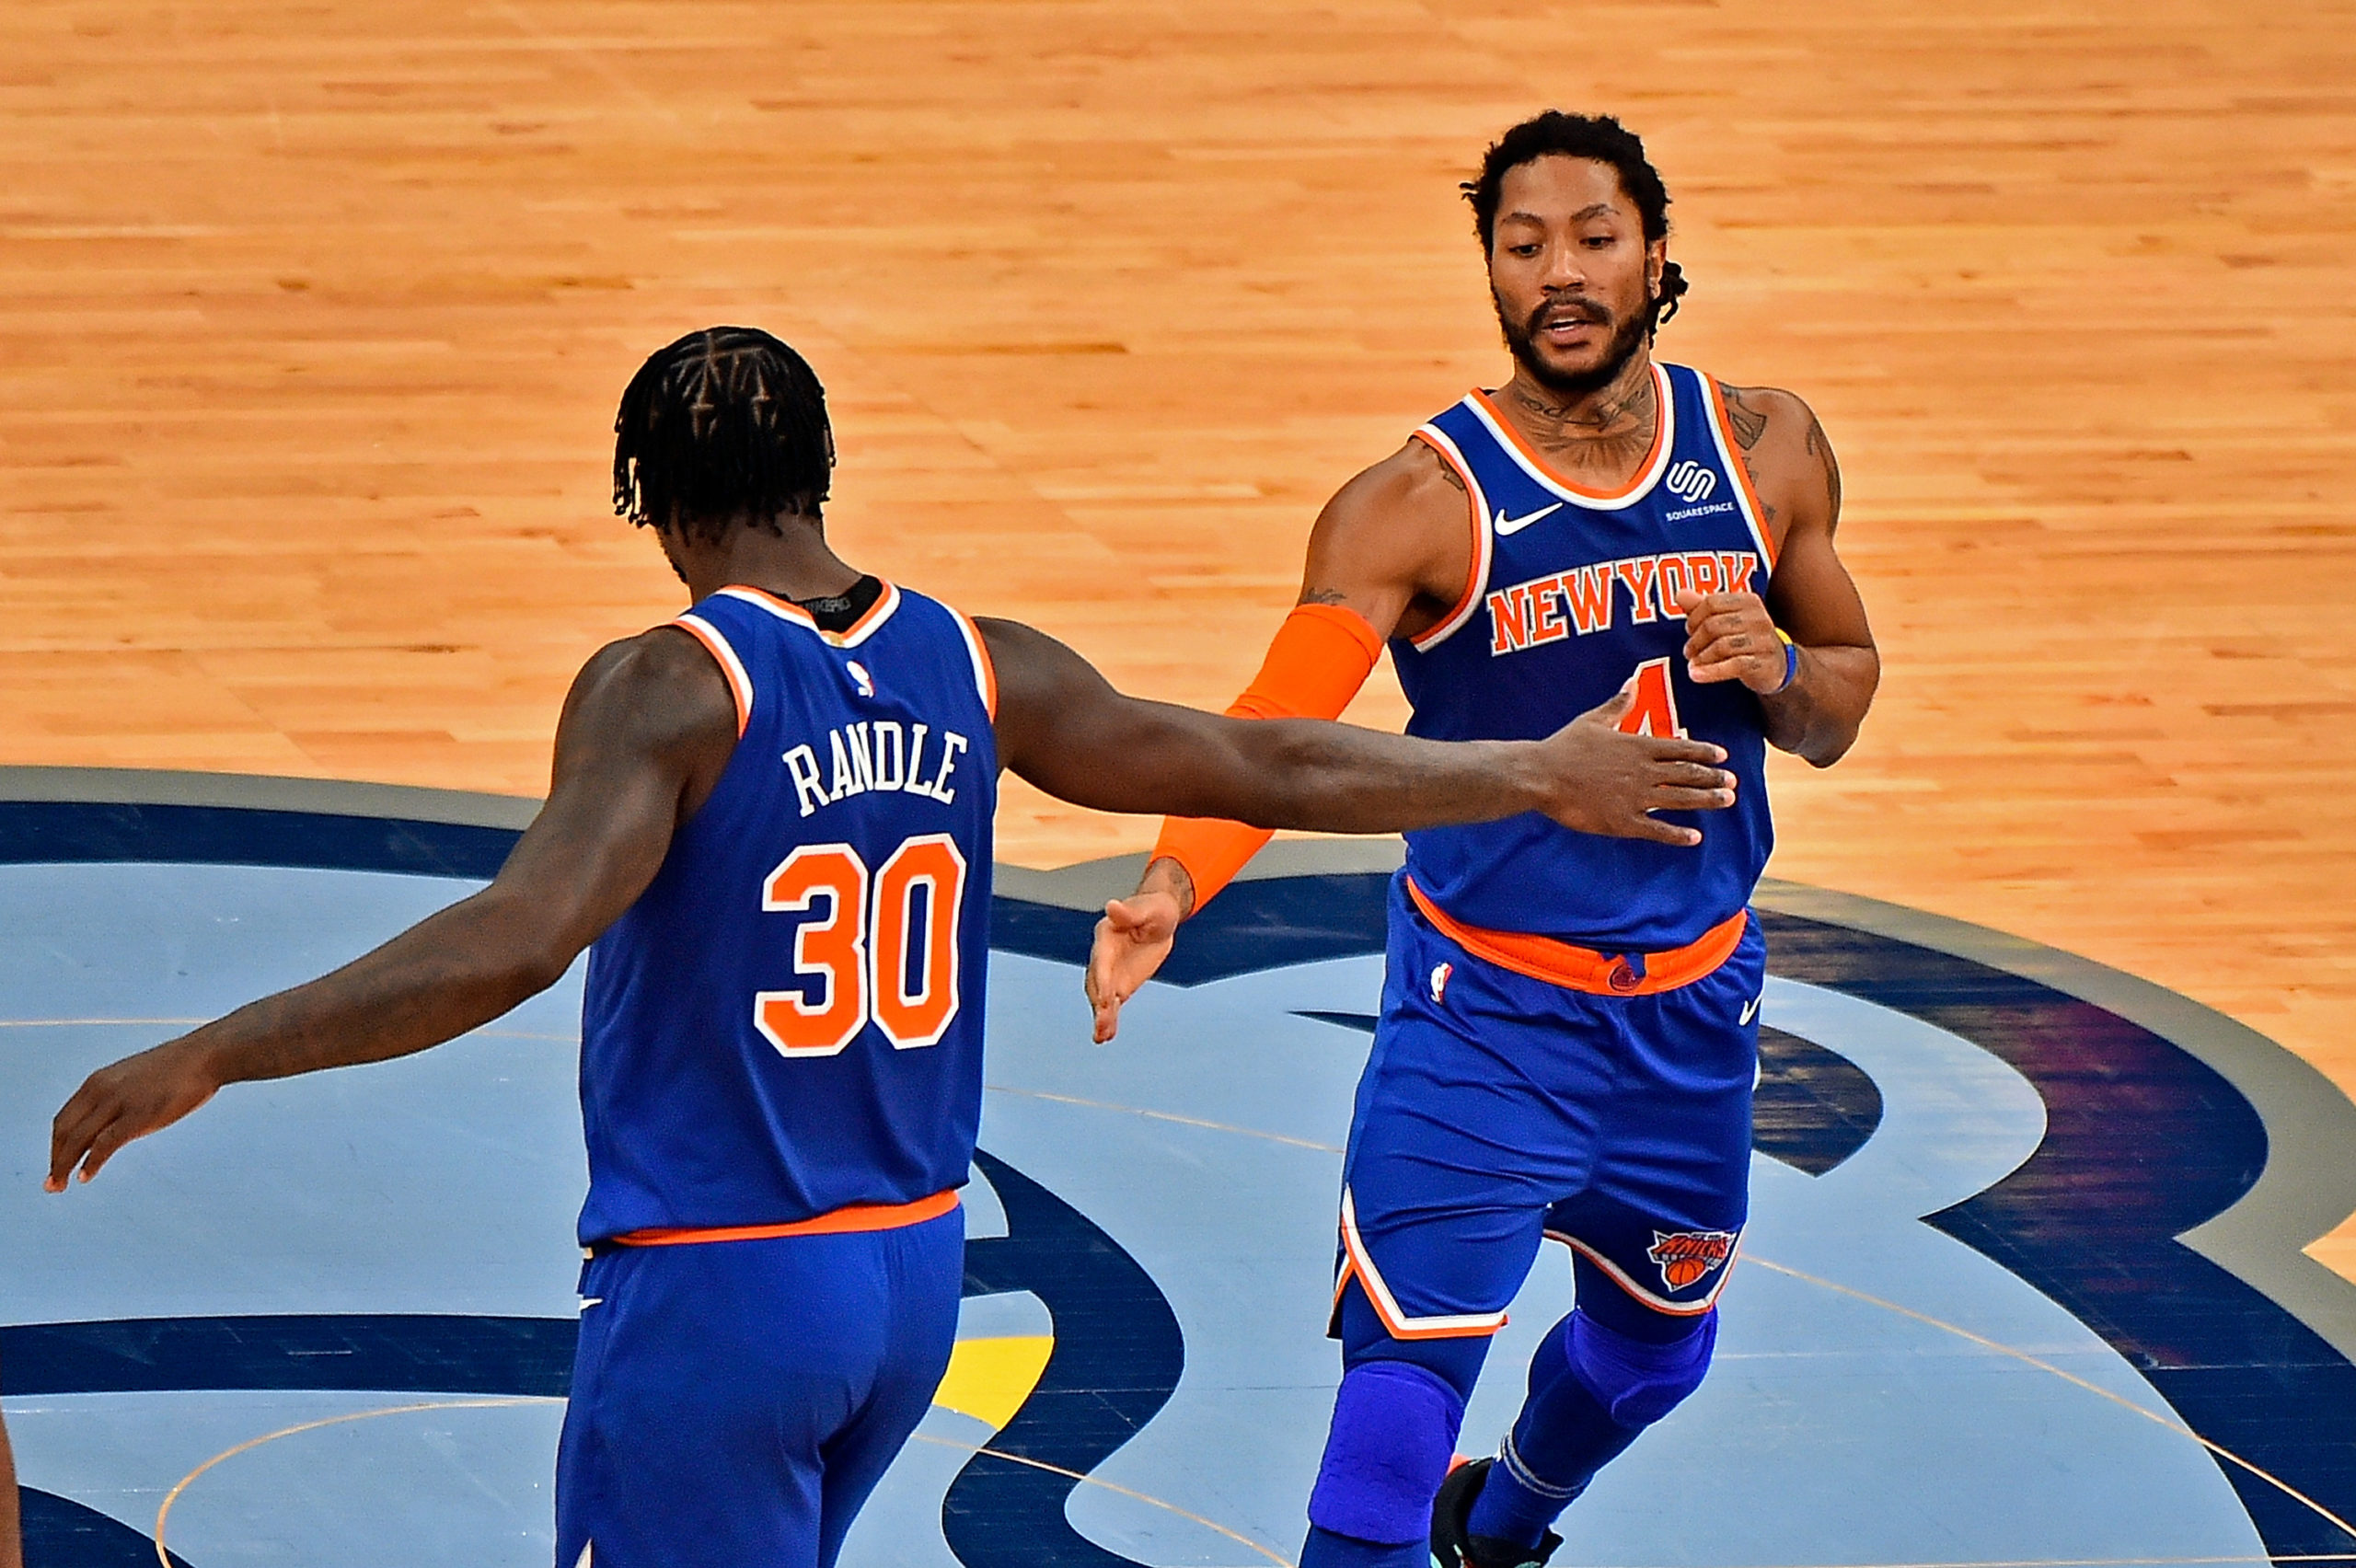 Knicks Win 3 Straight Behind Rose's 25 - MSGNetworks.com